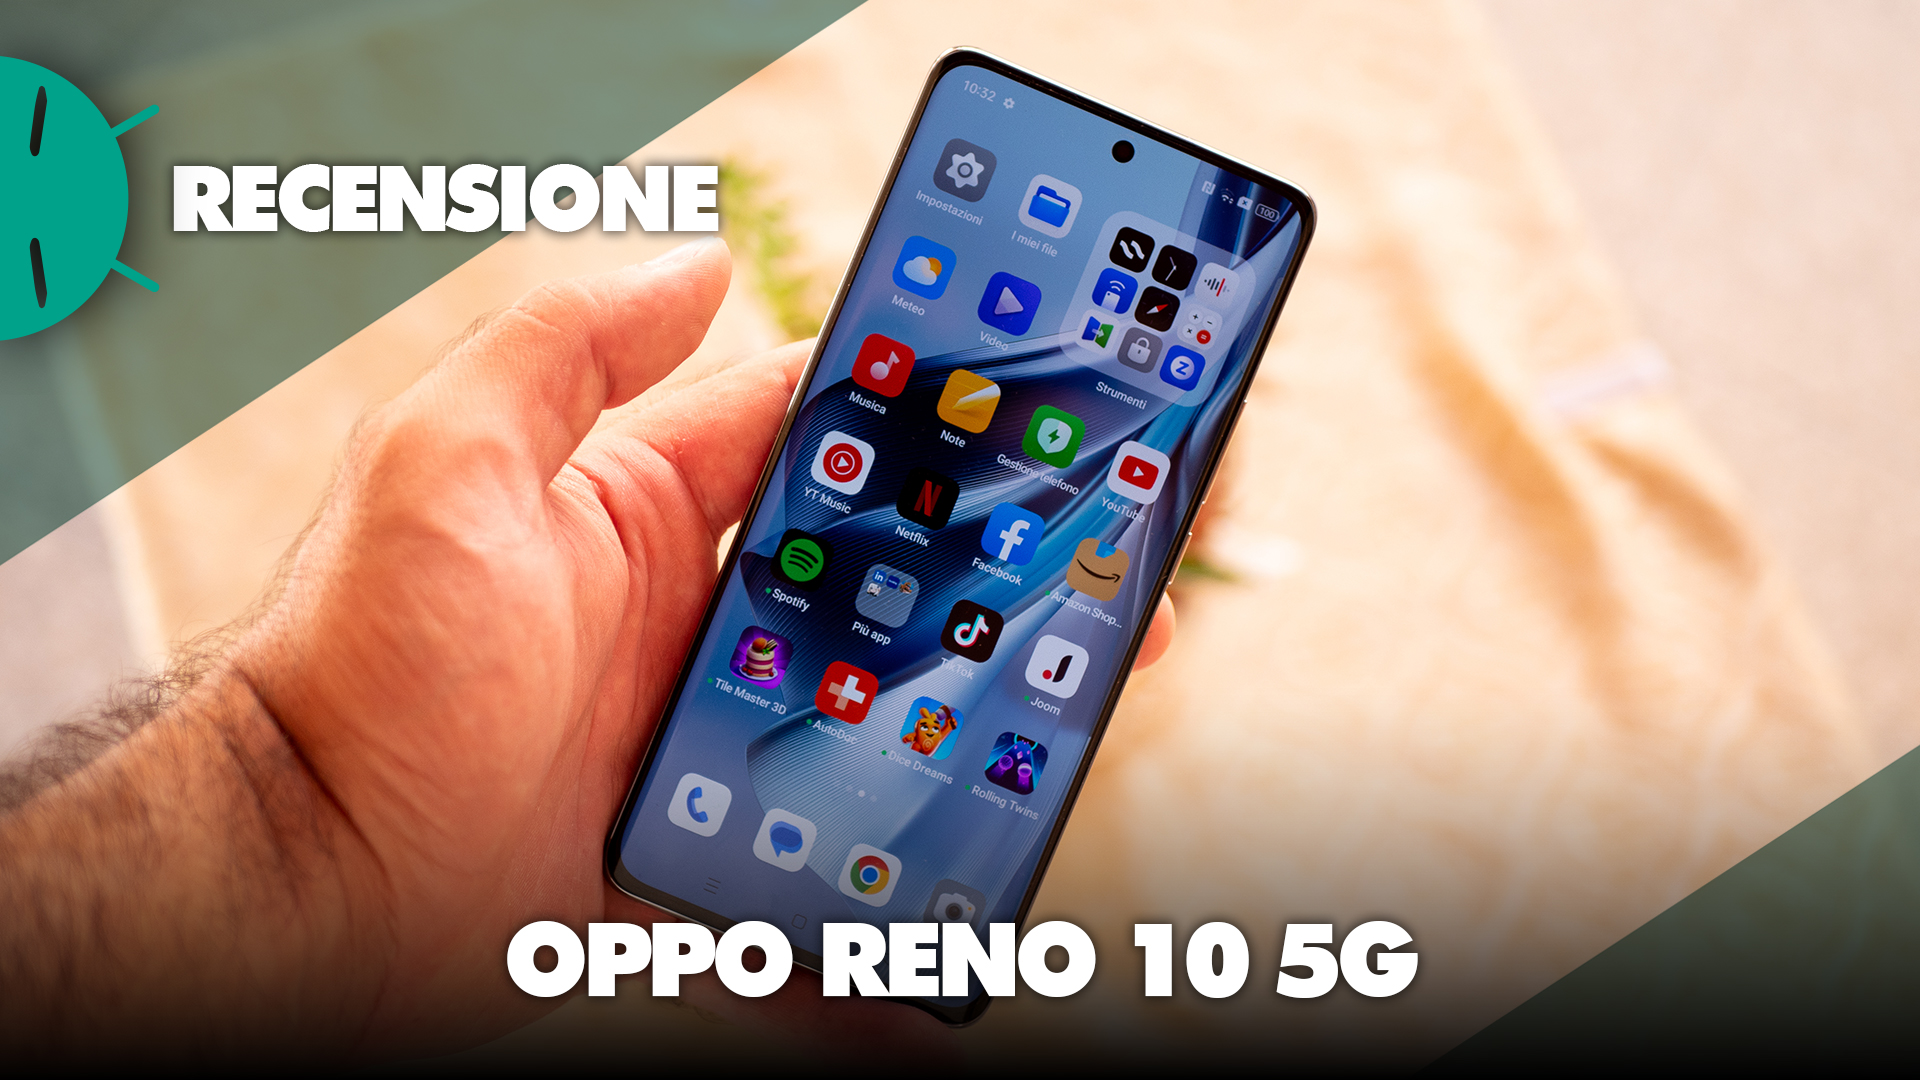 OPPO Reno 10 5G Mobile Phone 6.7 inch 120Hz OLED Flexible Curved